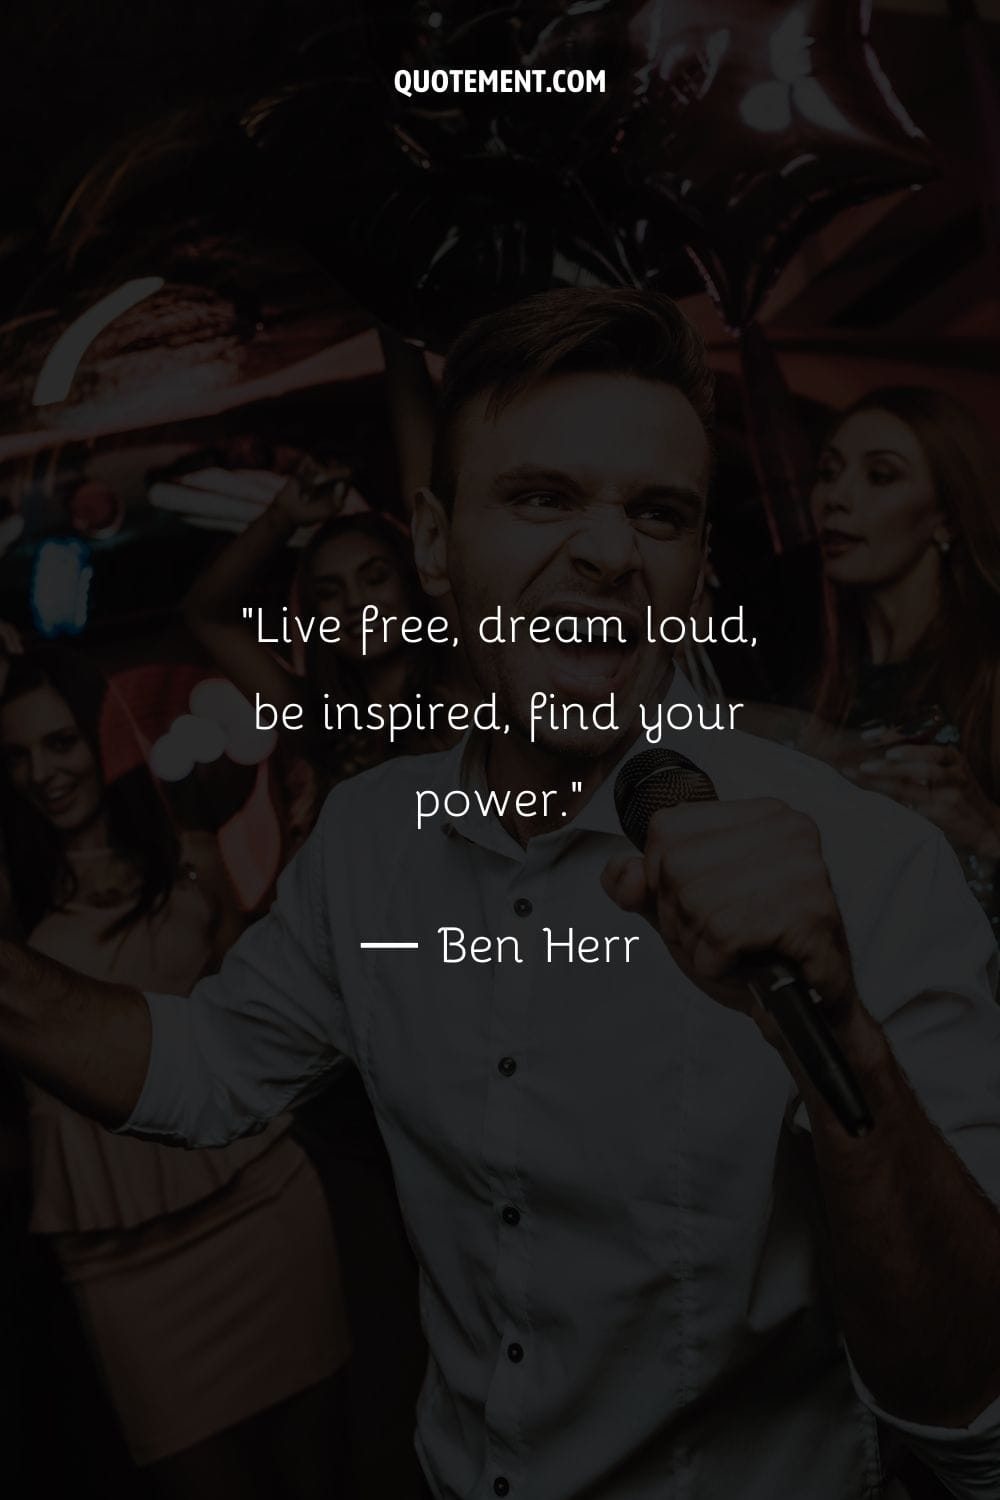 Live free, dream loud, be inspired, find your power.